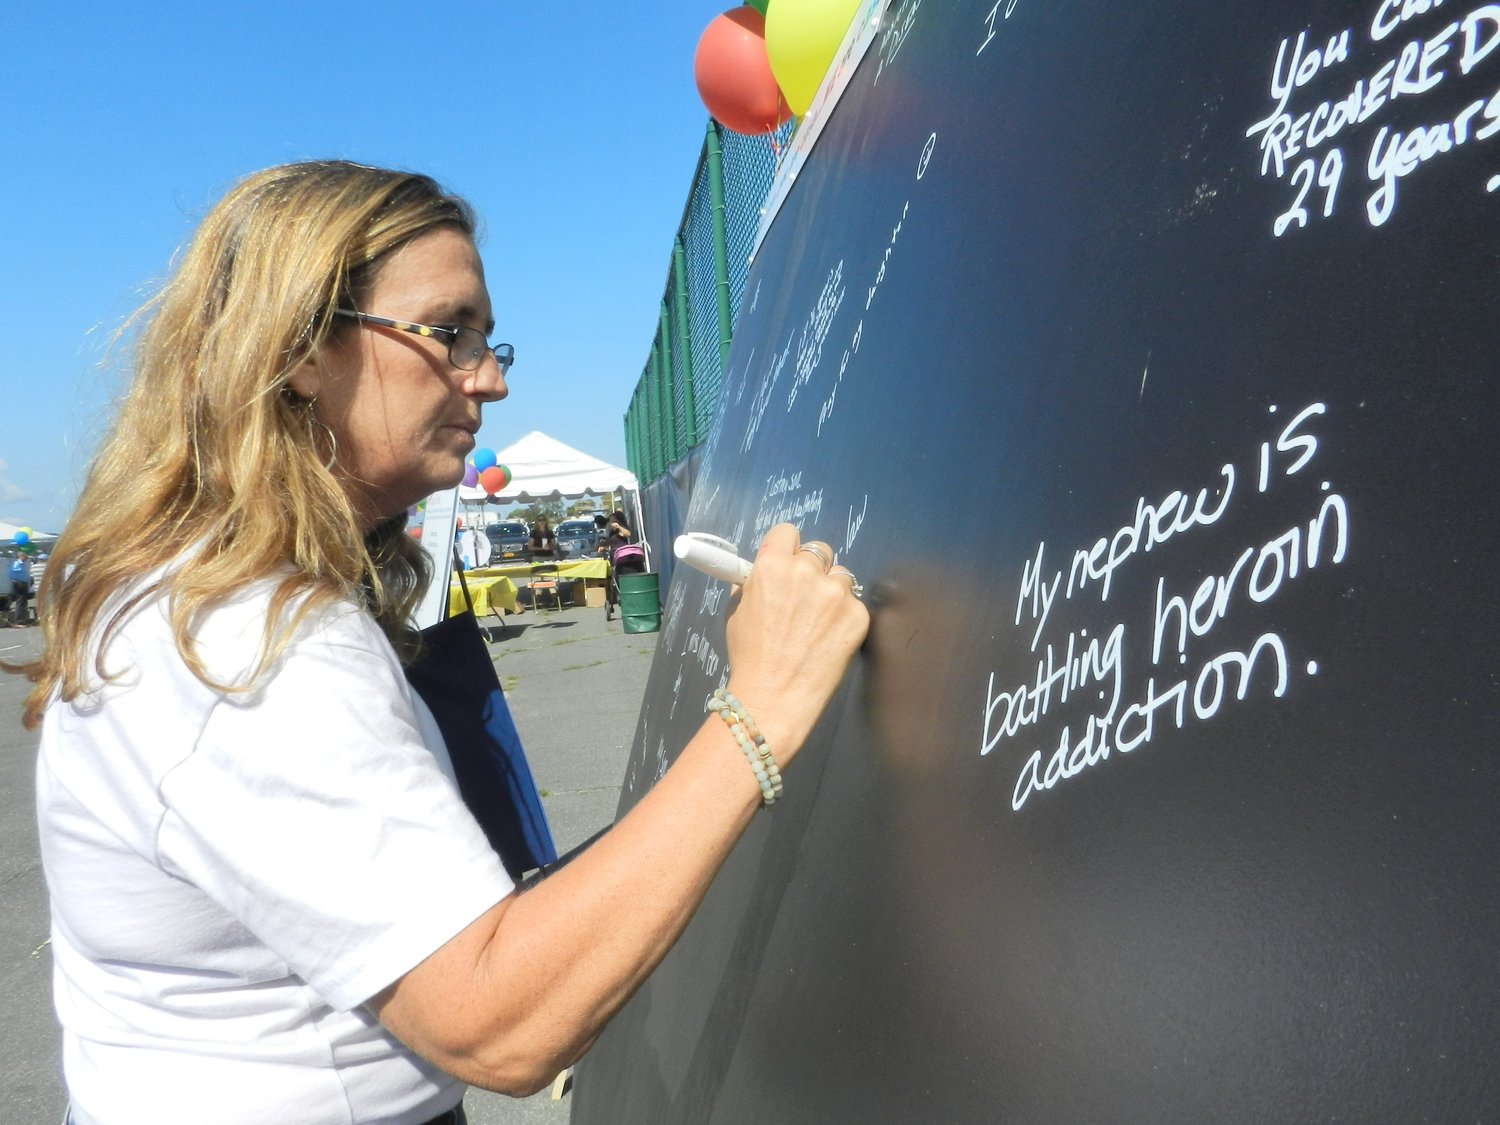 Alison Cammardella, sector coordinator of the North Shore Coalition Against Substance Abuse, signed the remembrance wall created in tribute to those affected by substance abuse.